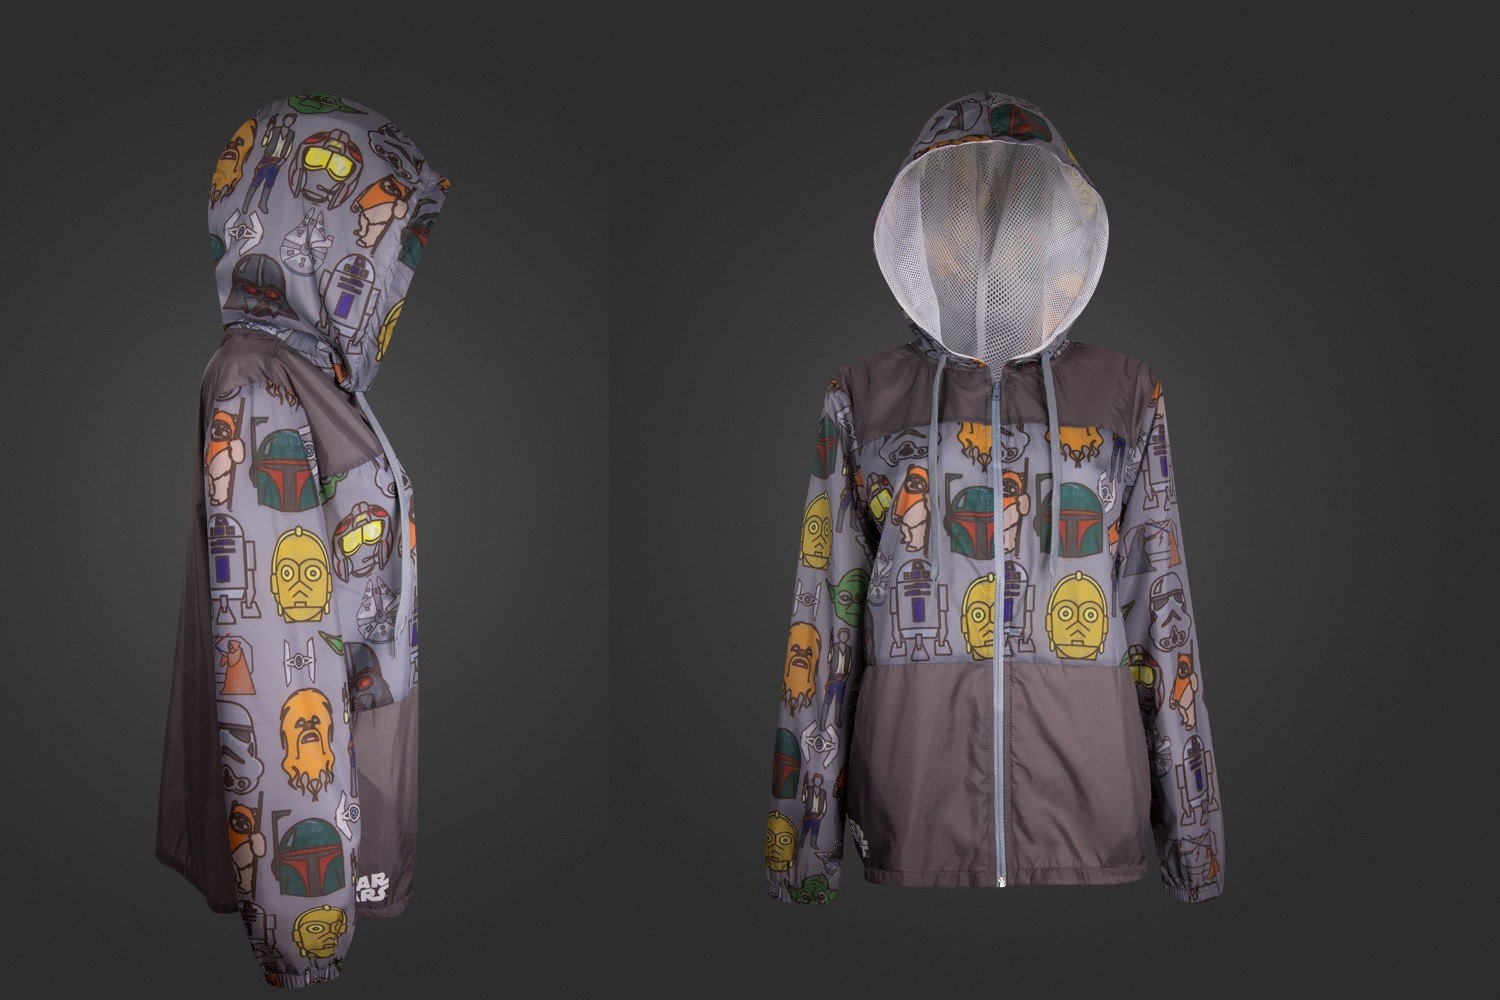 Women's Star Wars sketchy windbreaker available at We Love Fine